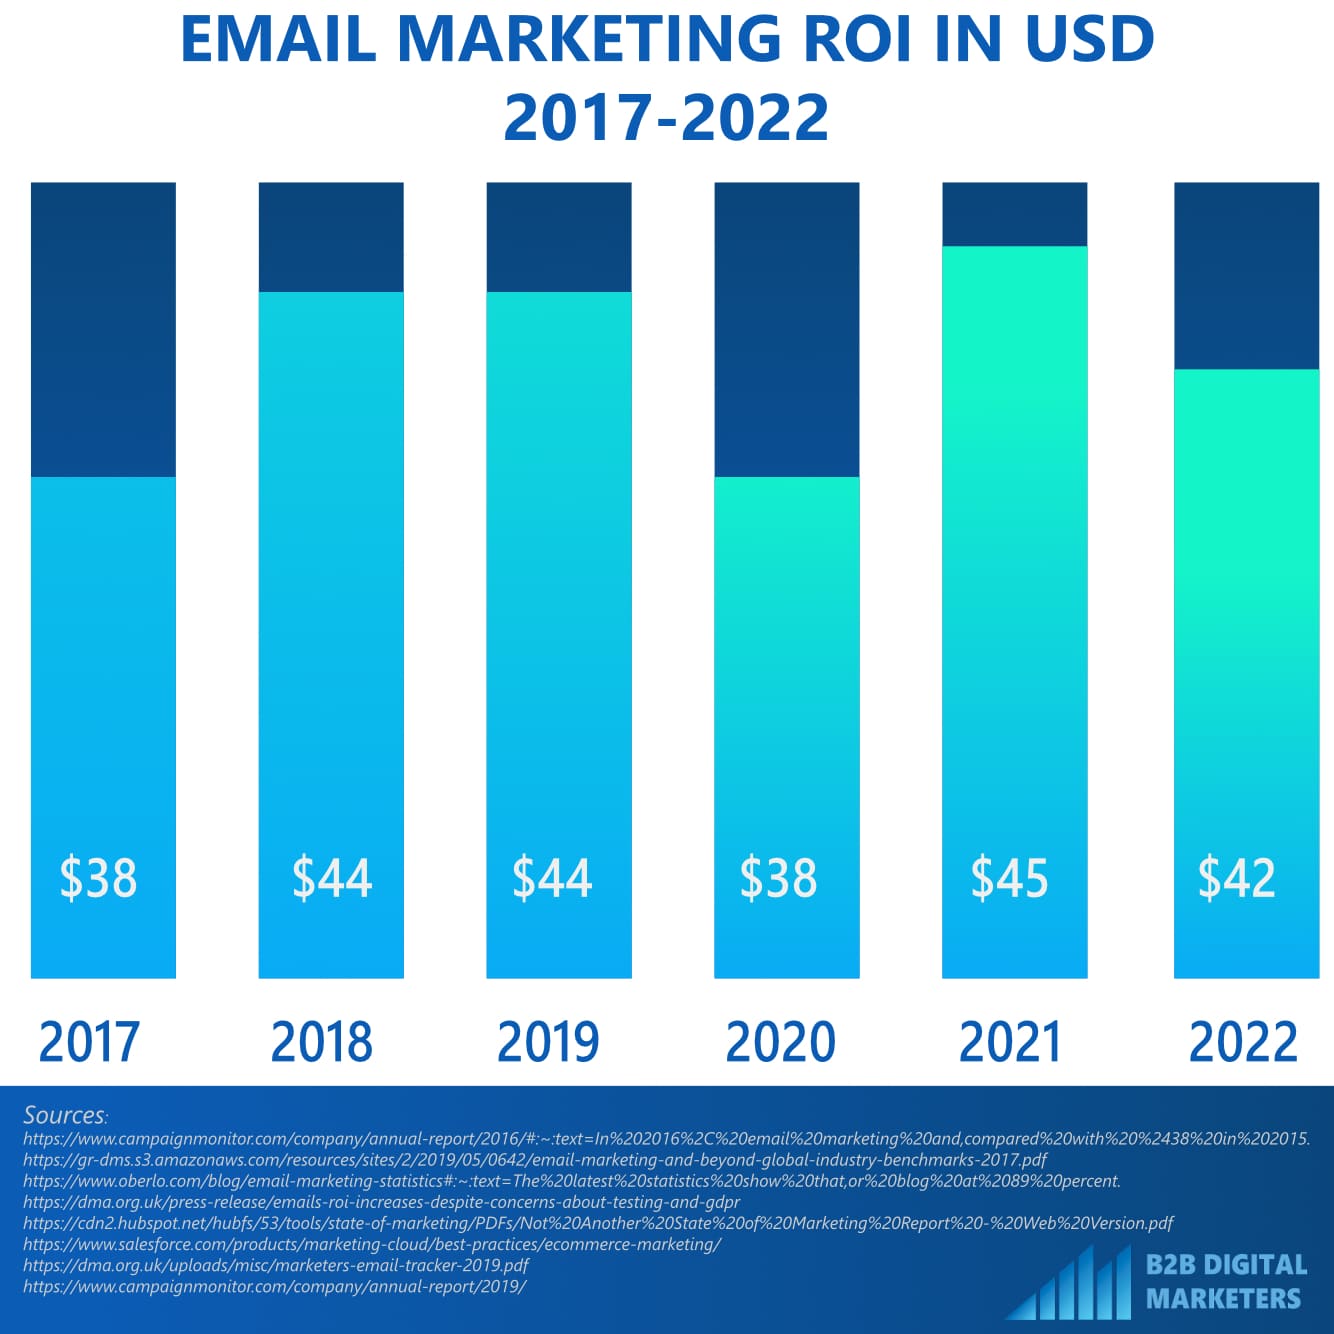 Email marketing ROI year over year from 2017 to 2022. A graph that shows email marketing ROI from the year 2017 to 2022. Email Marketing ROI in USD 2017-2022 infographic from b2bdigitalmarketers.